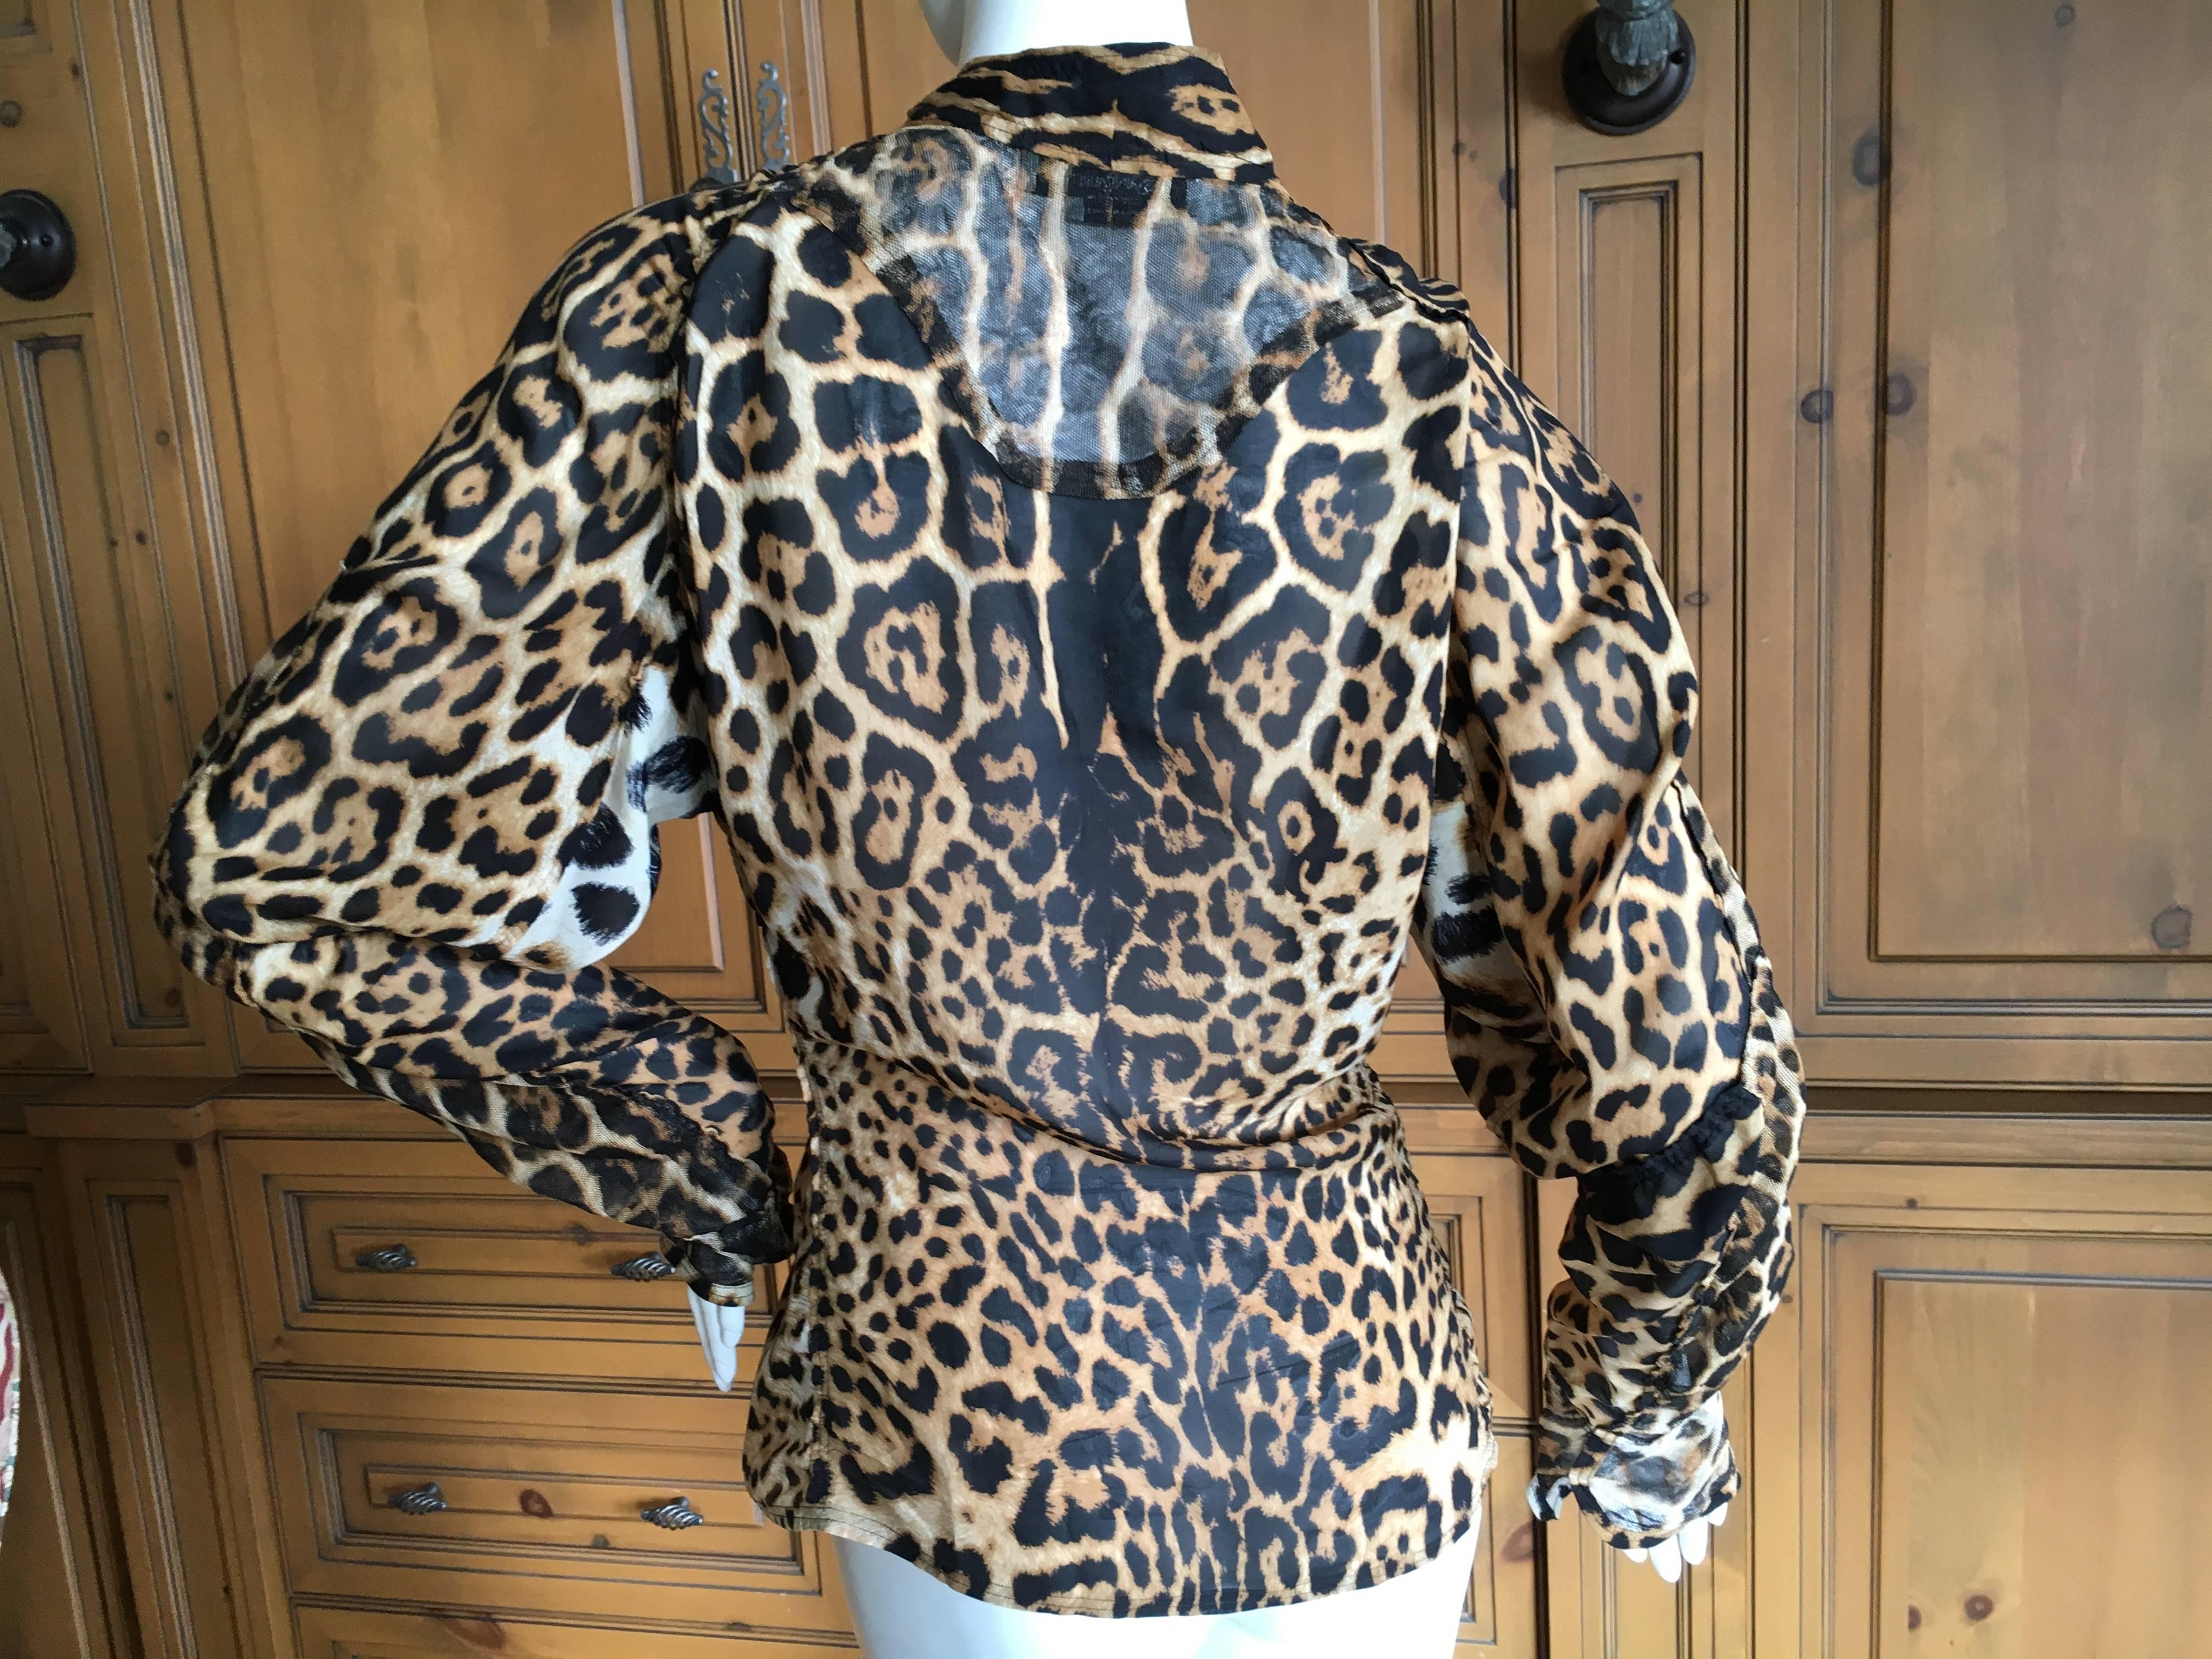 Yves Saint Laurent Silk Leopard Print Top by Tom Ford
Size 38
Bust 38